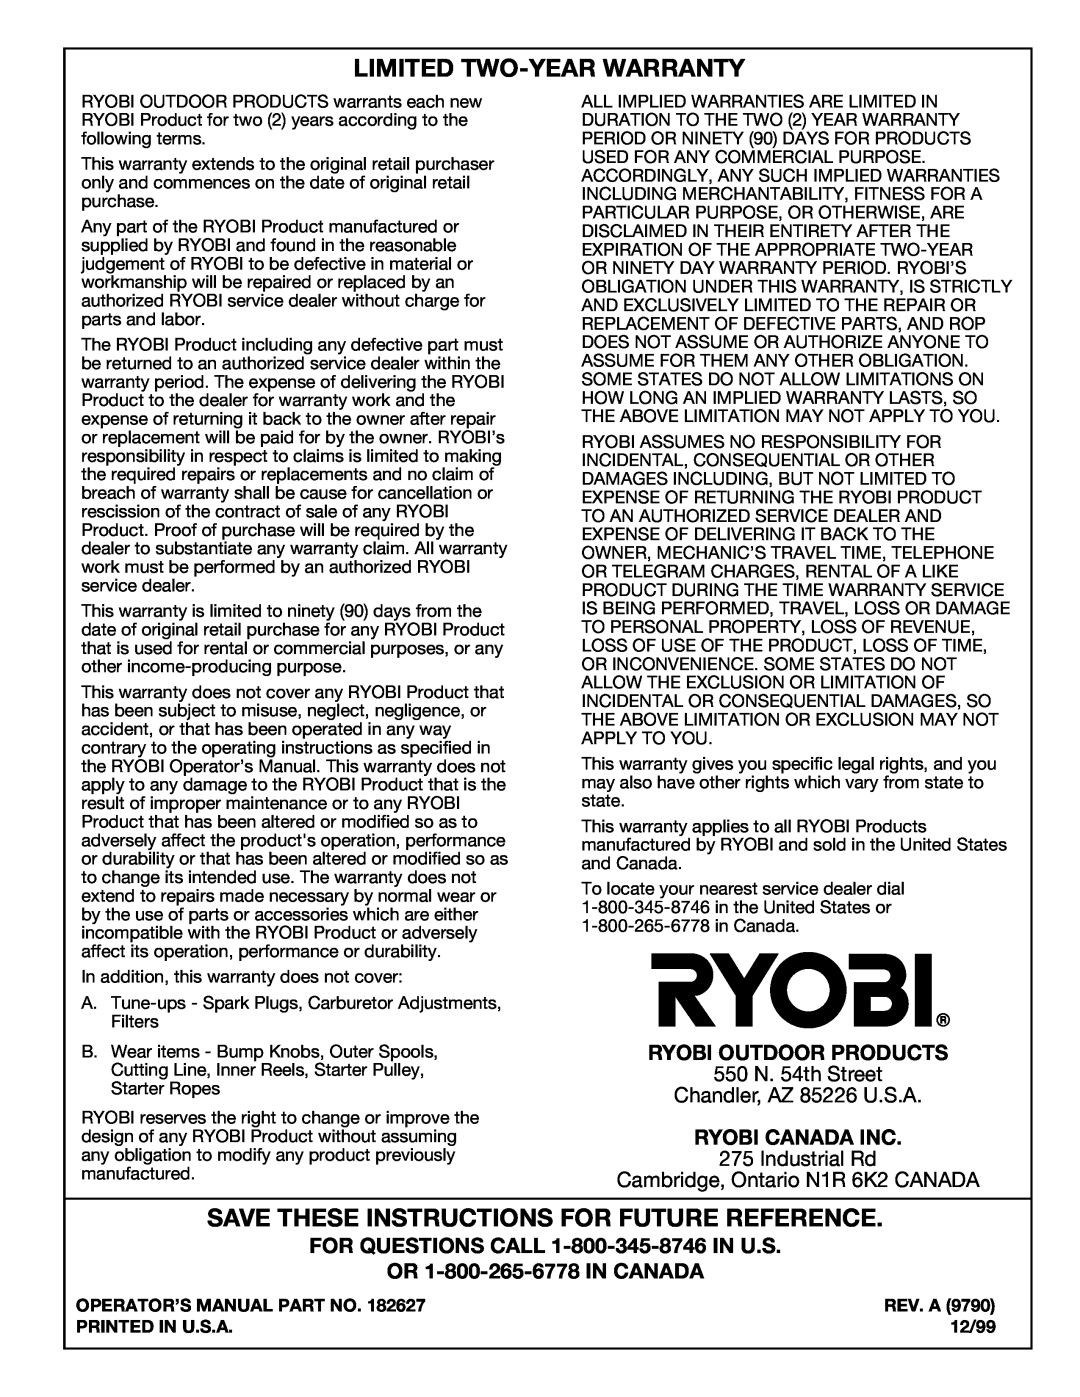 Ryobi 767rj Limited Two-Yearwarranty, Save These Instructions For Future Reference, Ryobi Outdoor Products, Industrial Rd 